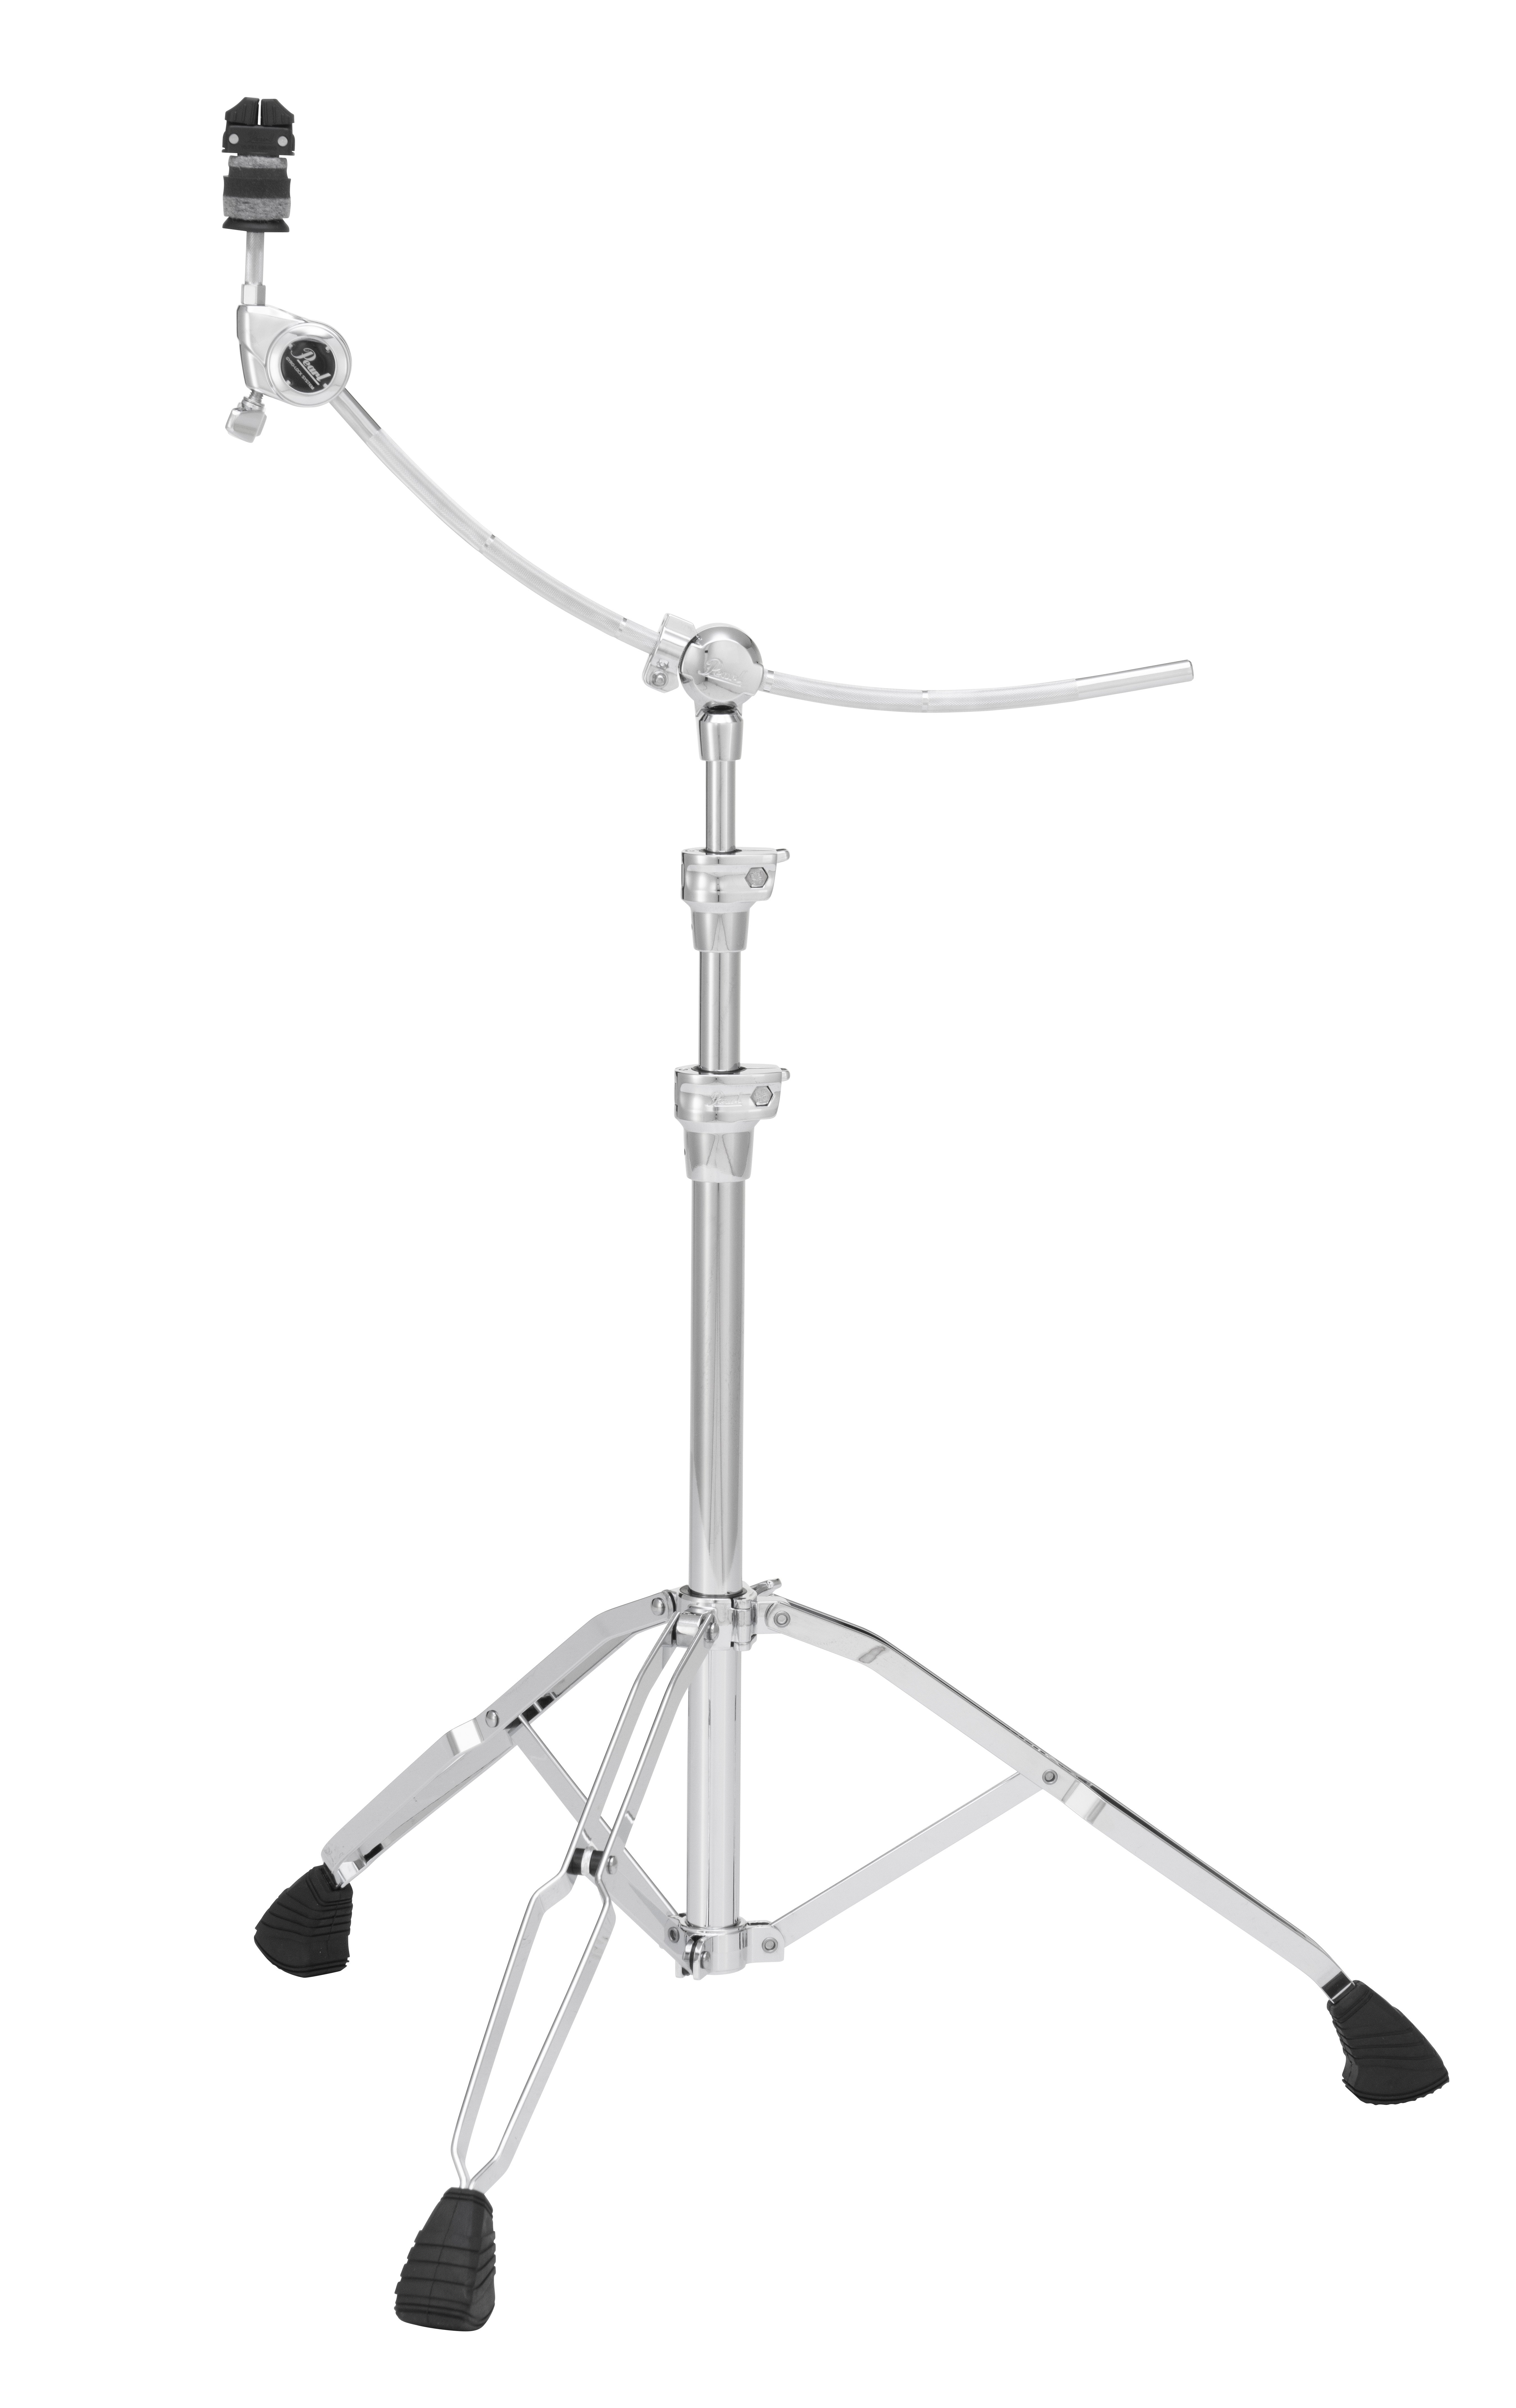 B1030C GyroLock Trident Tripod Touring Weight Cymbal Boom Stand with Curved Arm.jpg